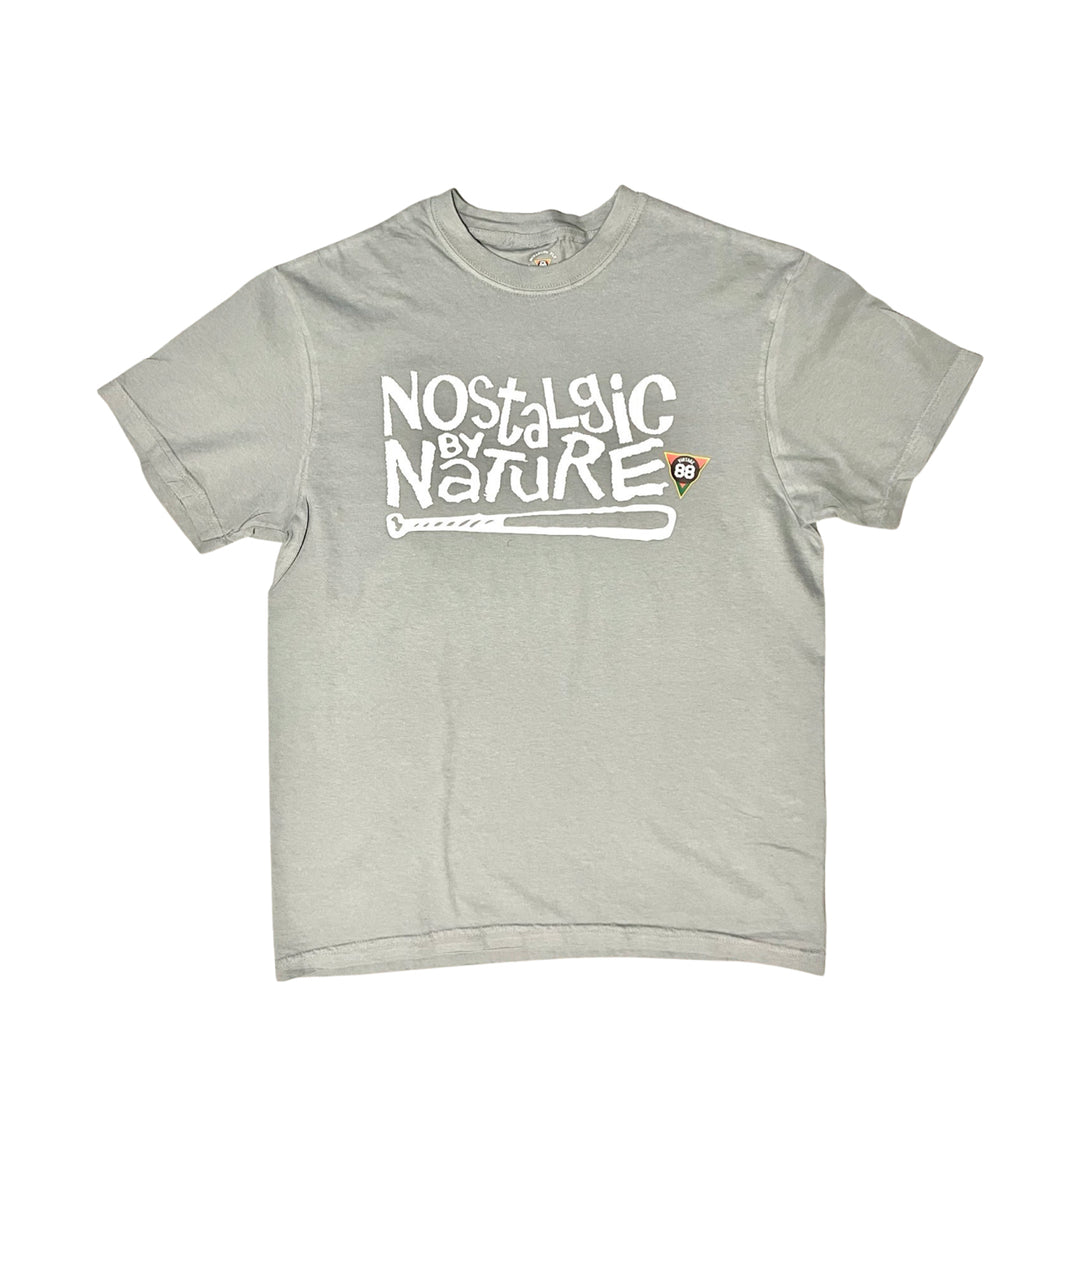 Nostalgic By Nature - Cement Gray